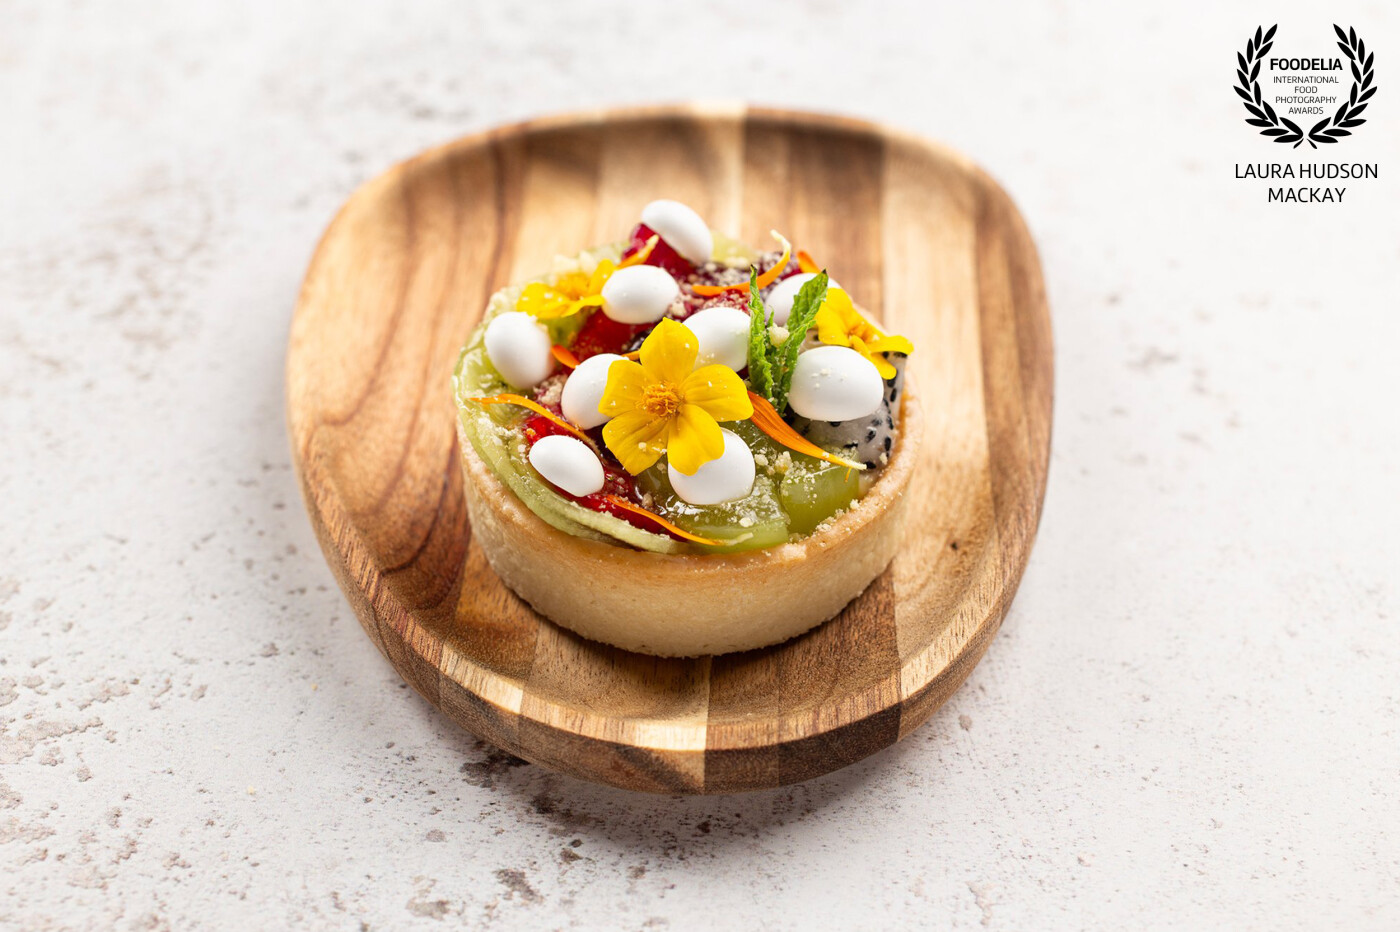 An exquisite fruit tart with meringue and tagete. Photographed at The Loft studio using artificial light. Totally incredible to collaborate, for a second time, with Scottish chef, Fraser Cameron.